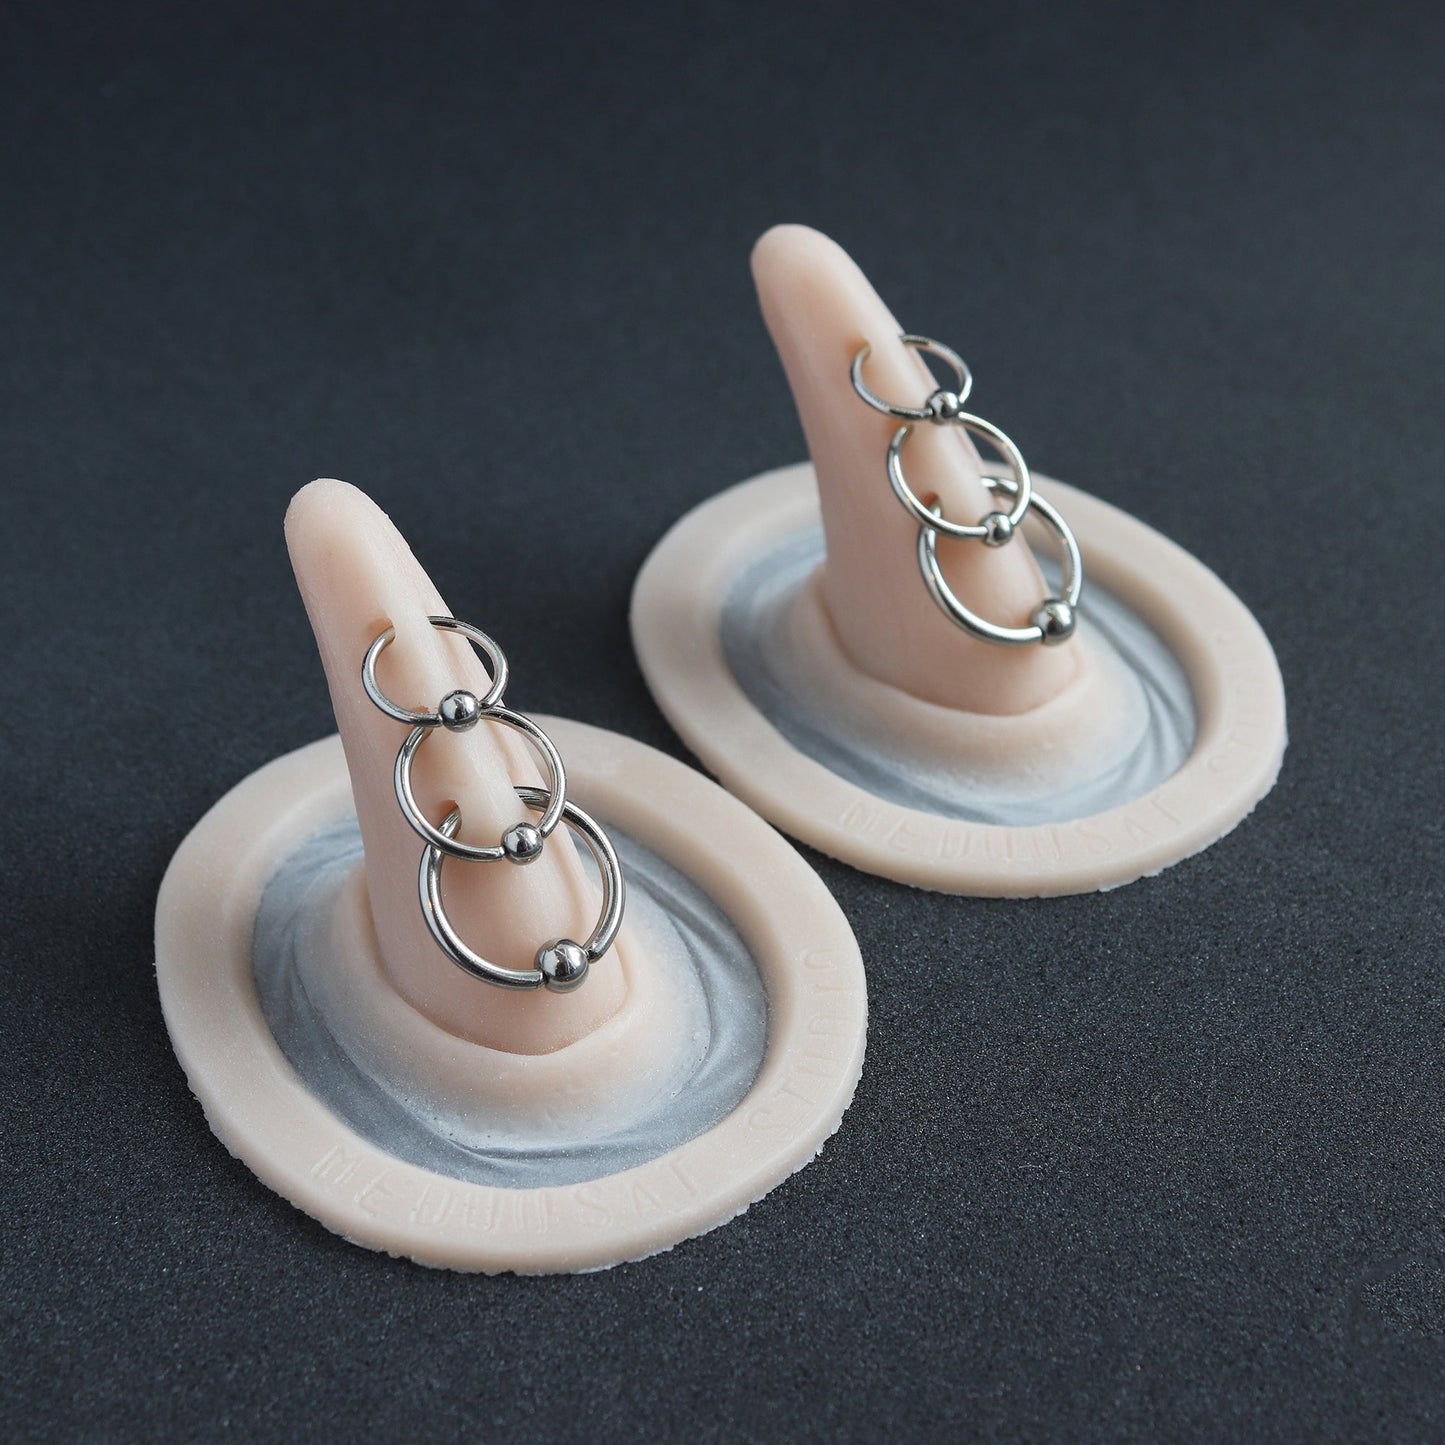 Triple Pierced Horns (Pair) - Silicone makeup prosthetic in vanilla shade on a black surface